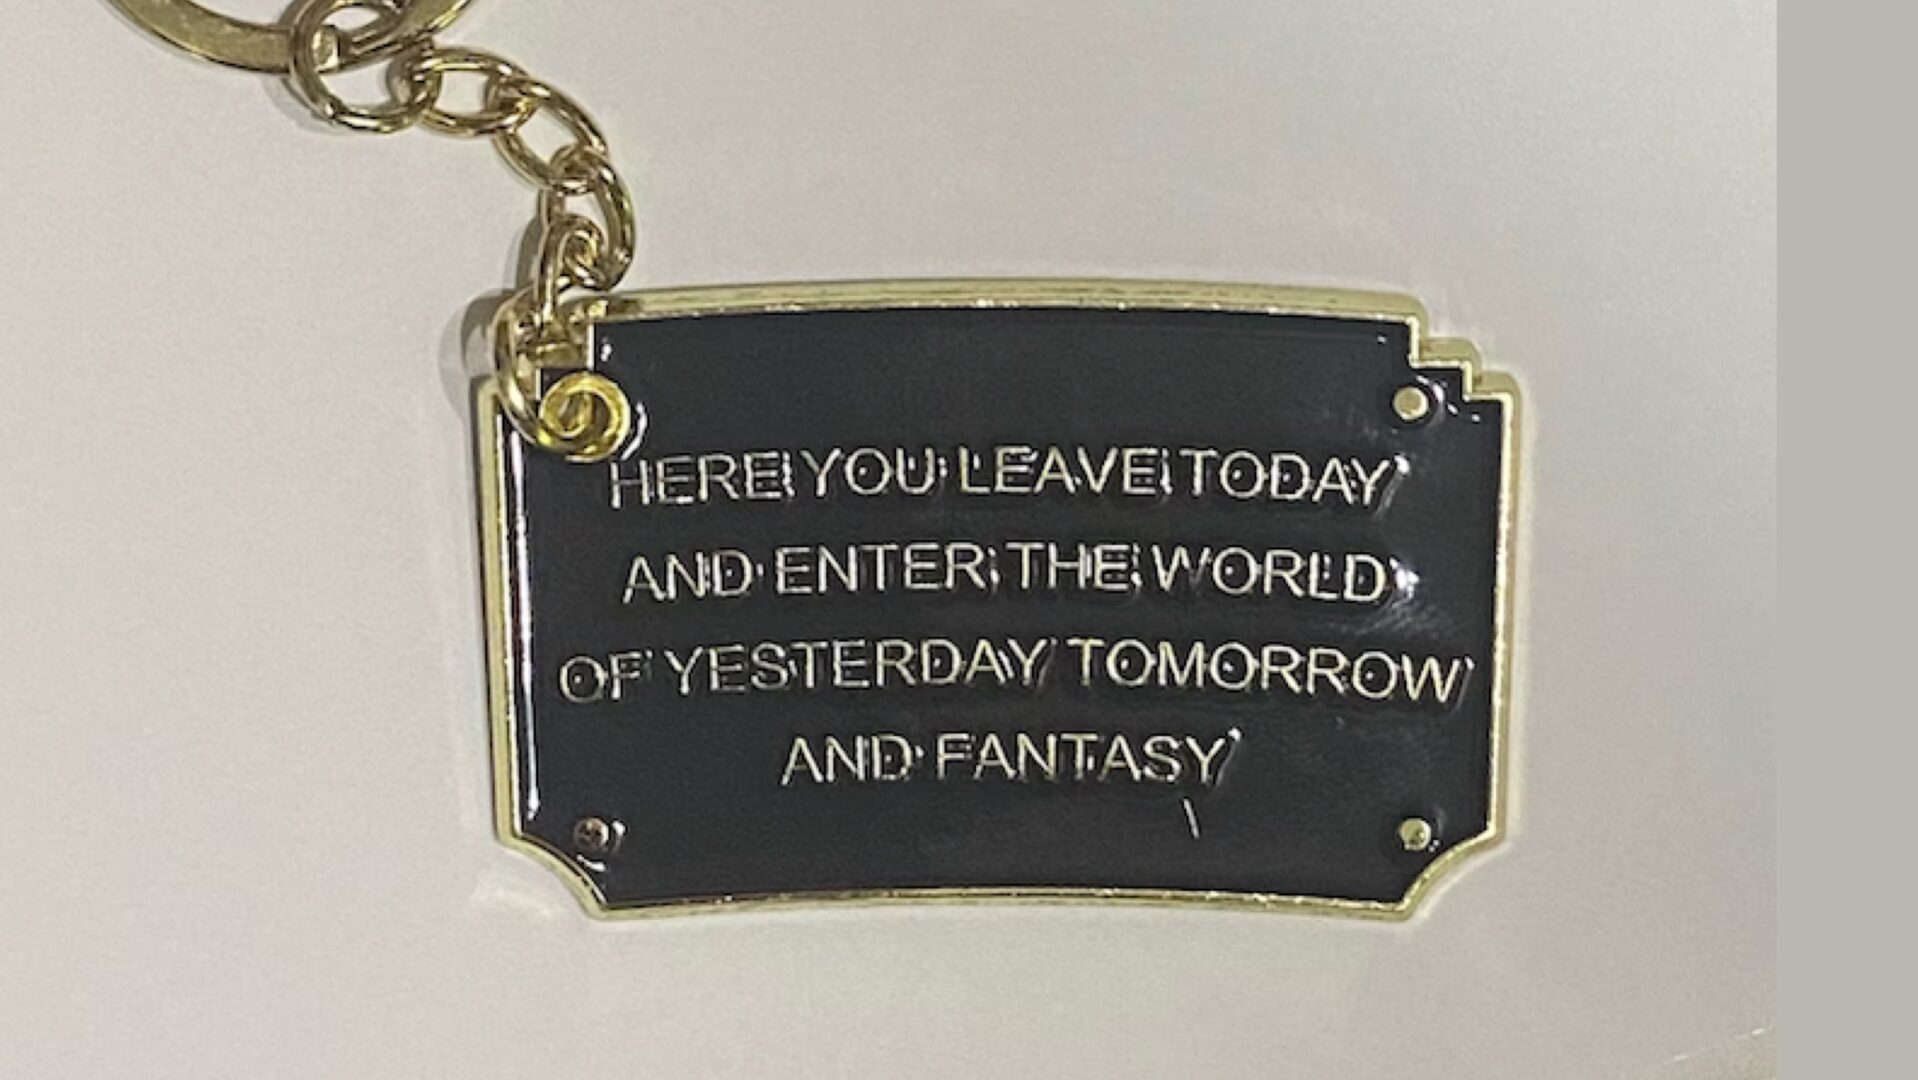 Disneyland Entrance Keychain To Bring The Magic With You Everywhere You Go!